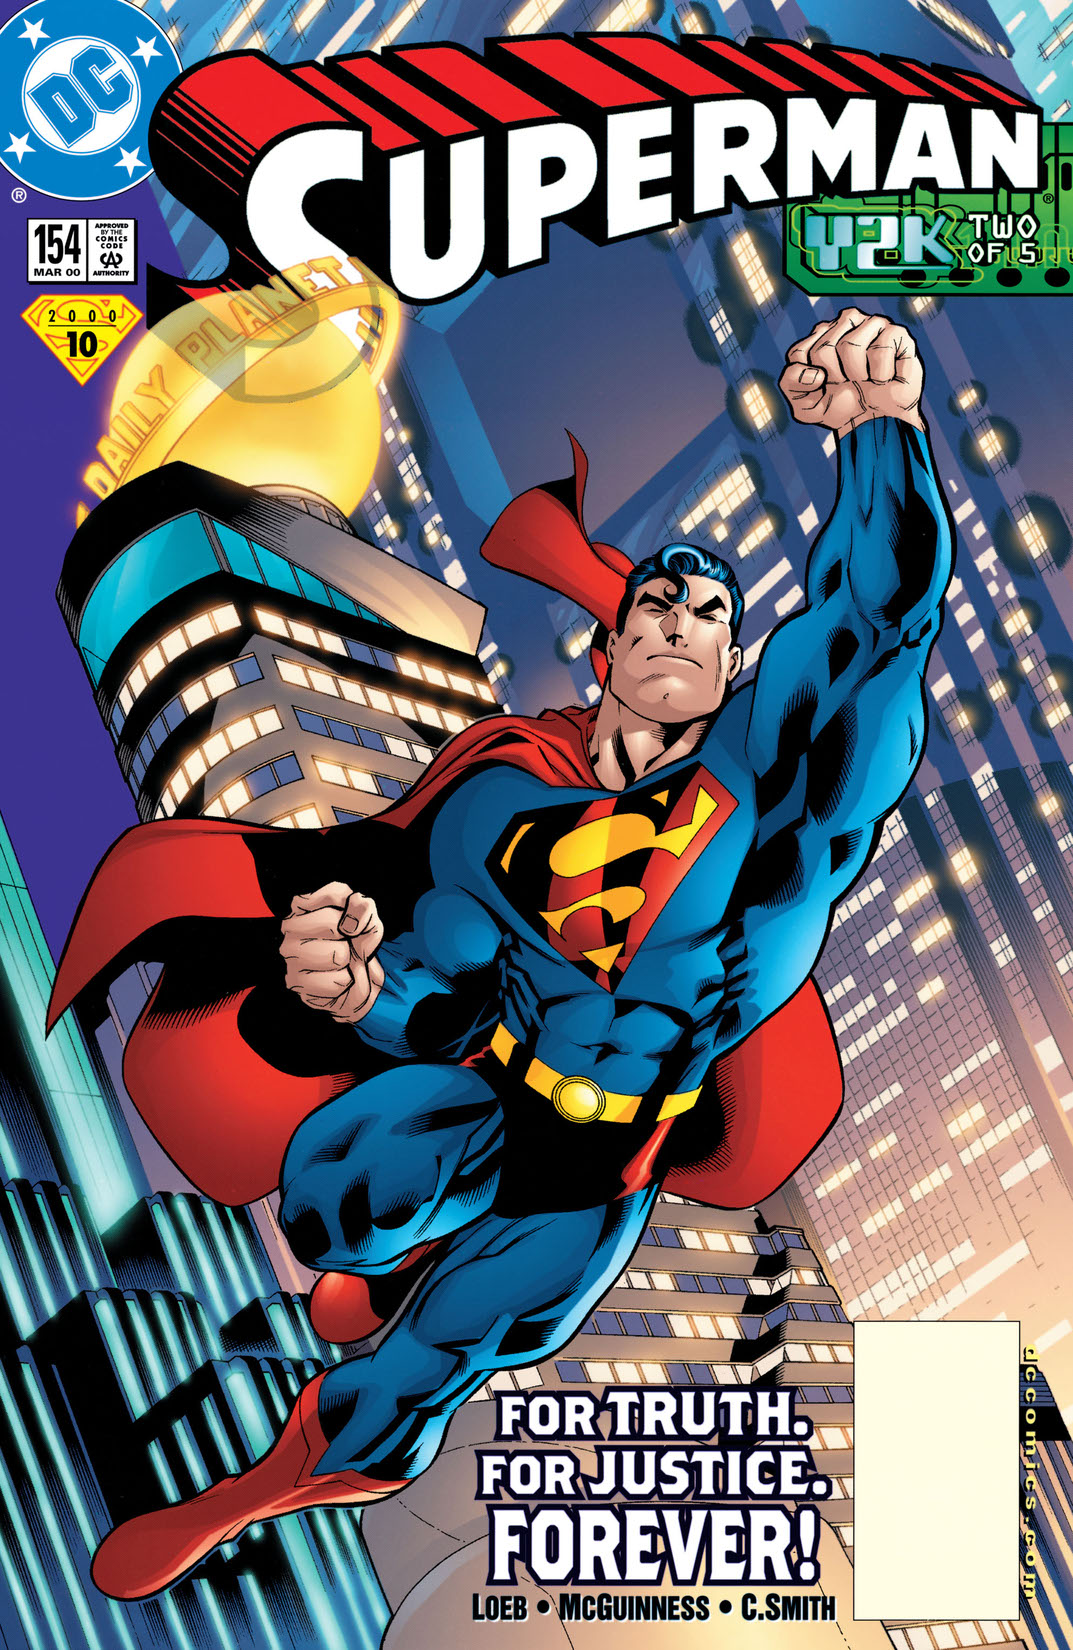 Superman (1986-2006) #154 preview images